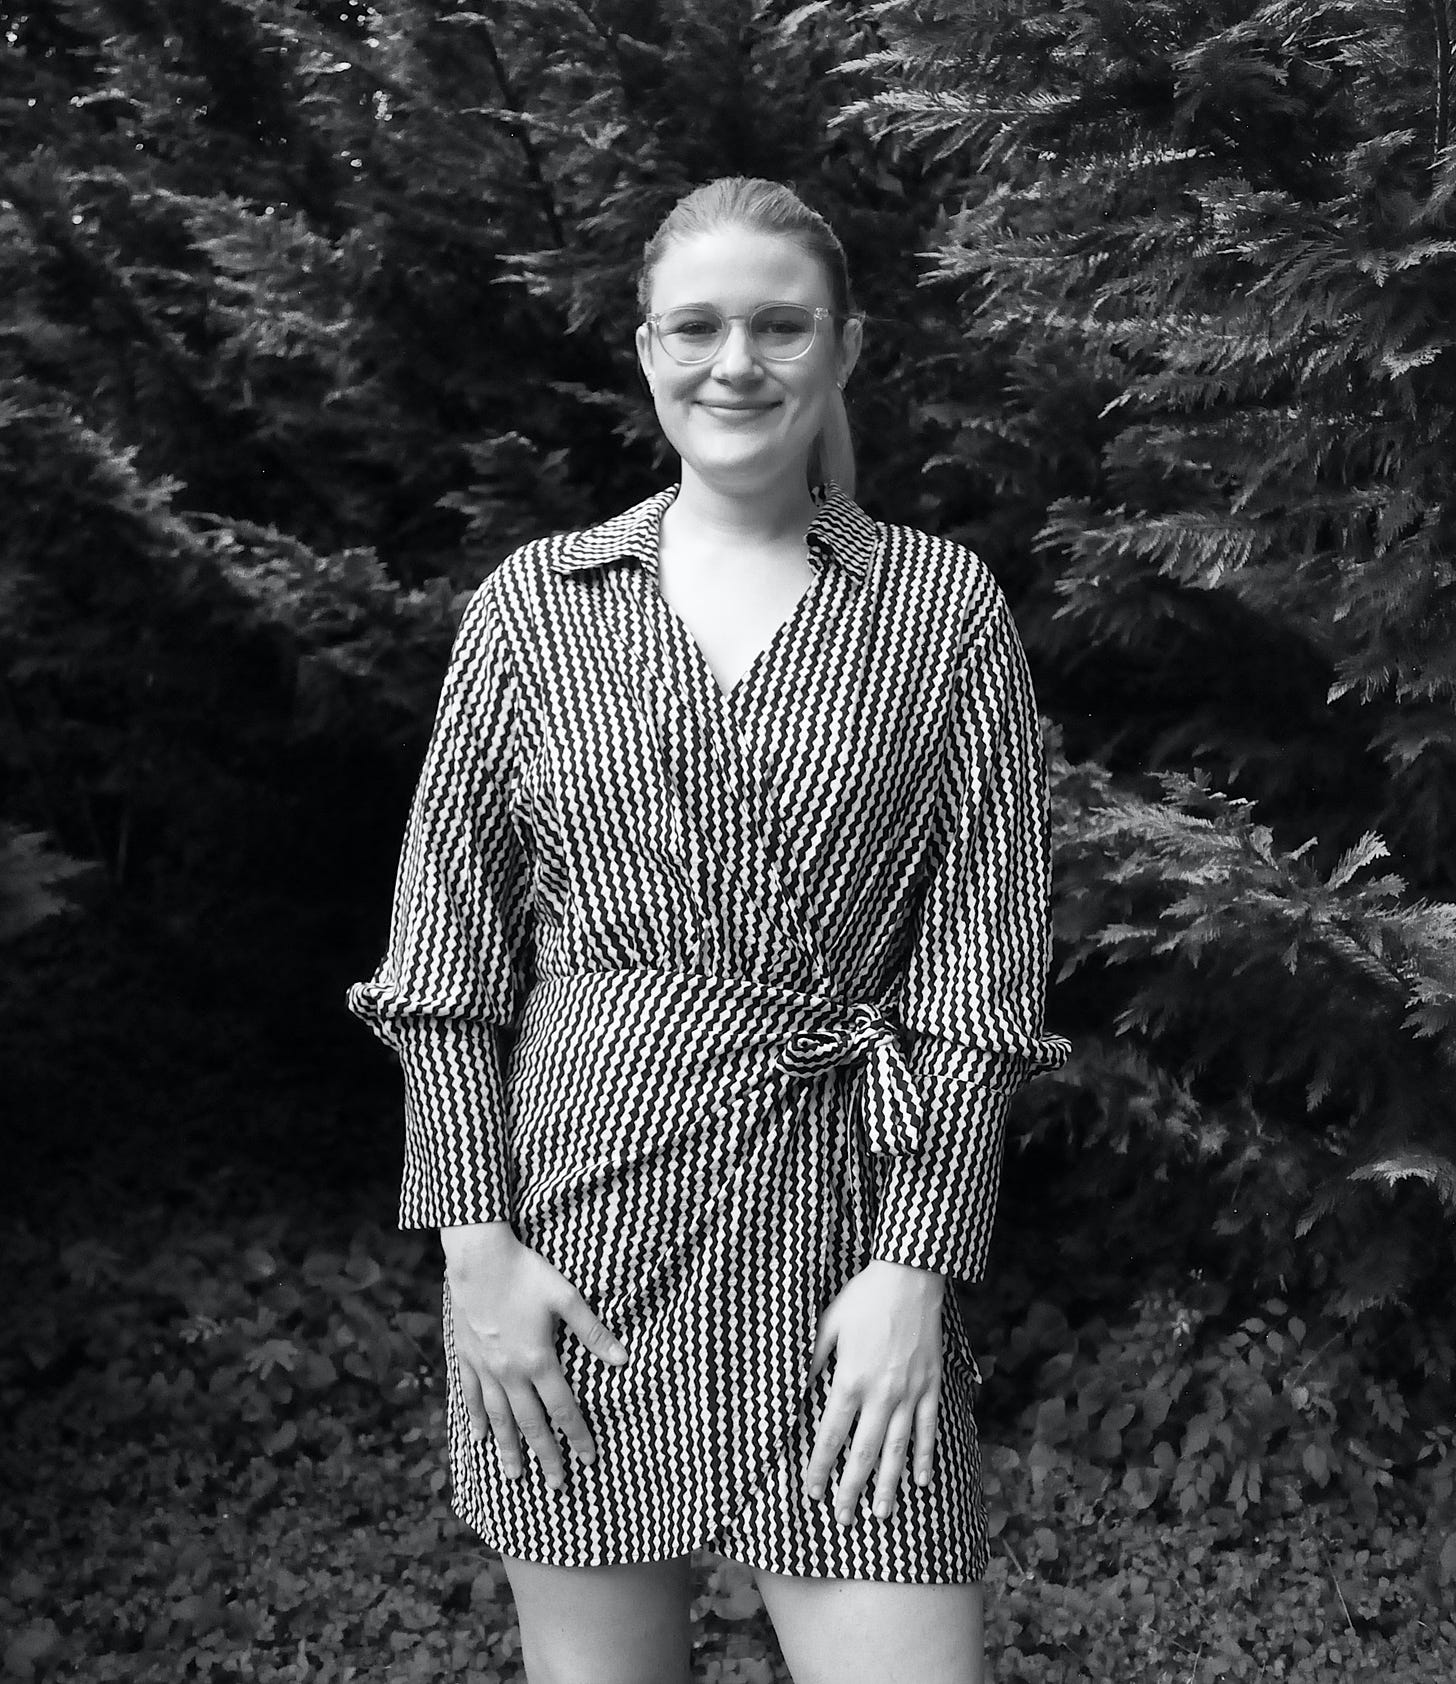 Photo of Shady Kimzey, a white non-binary femme wearing a mid-legnth black and white wrap dress, wearing glasses with their hair in a ponytail, standing in front of evergreen trees outside.